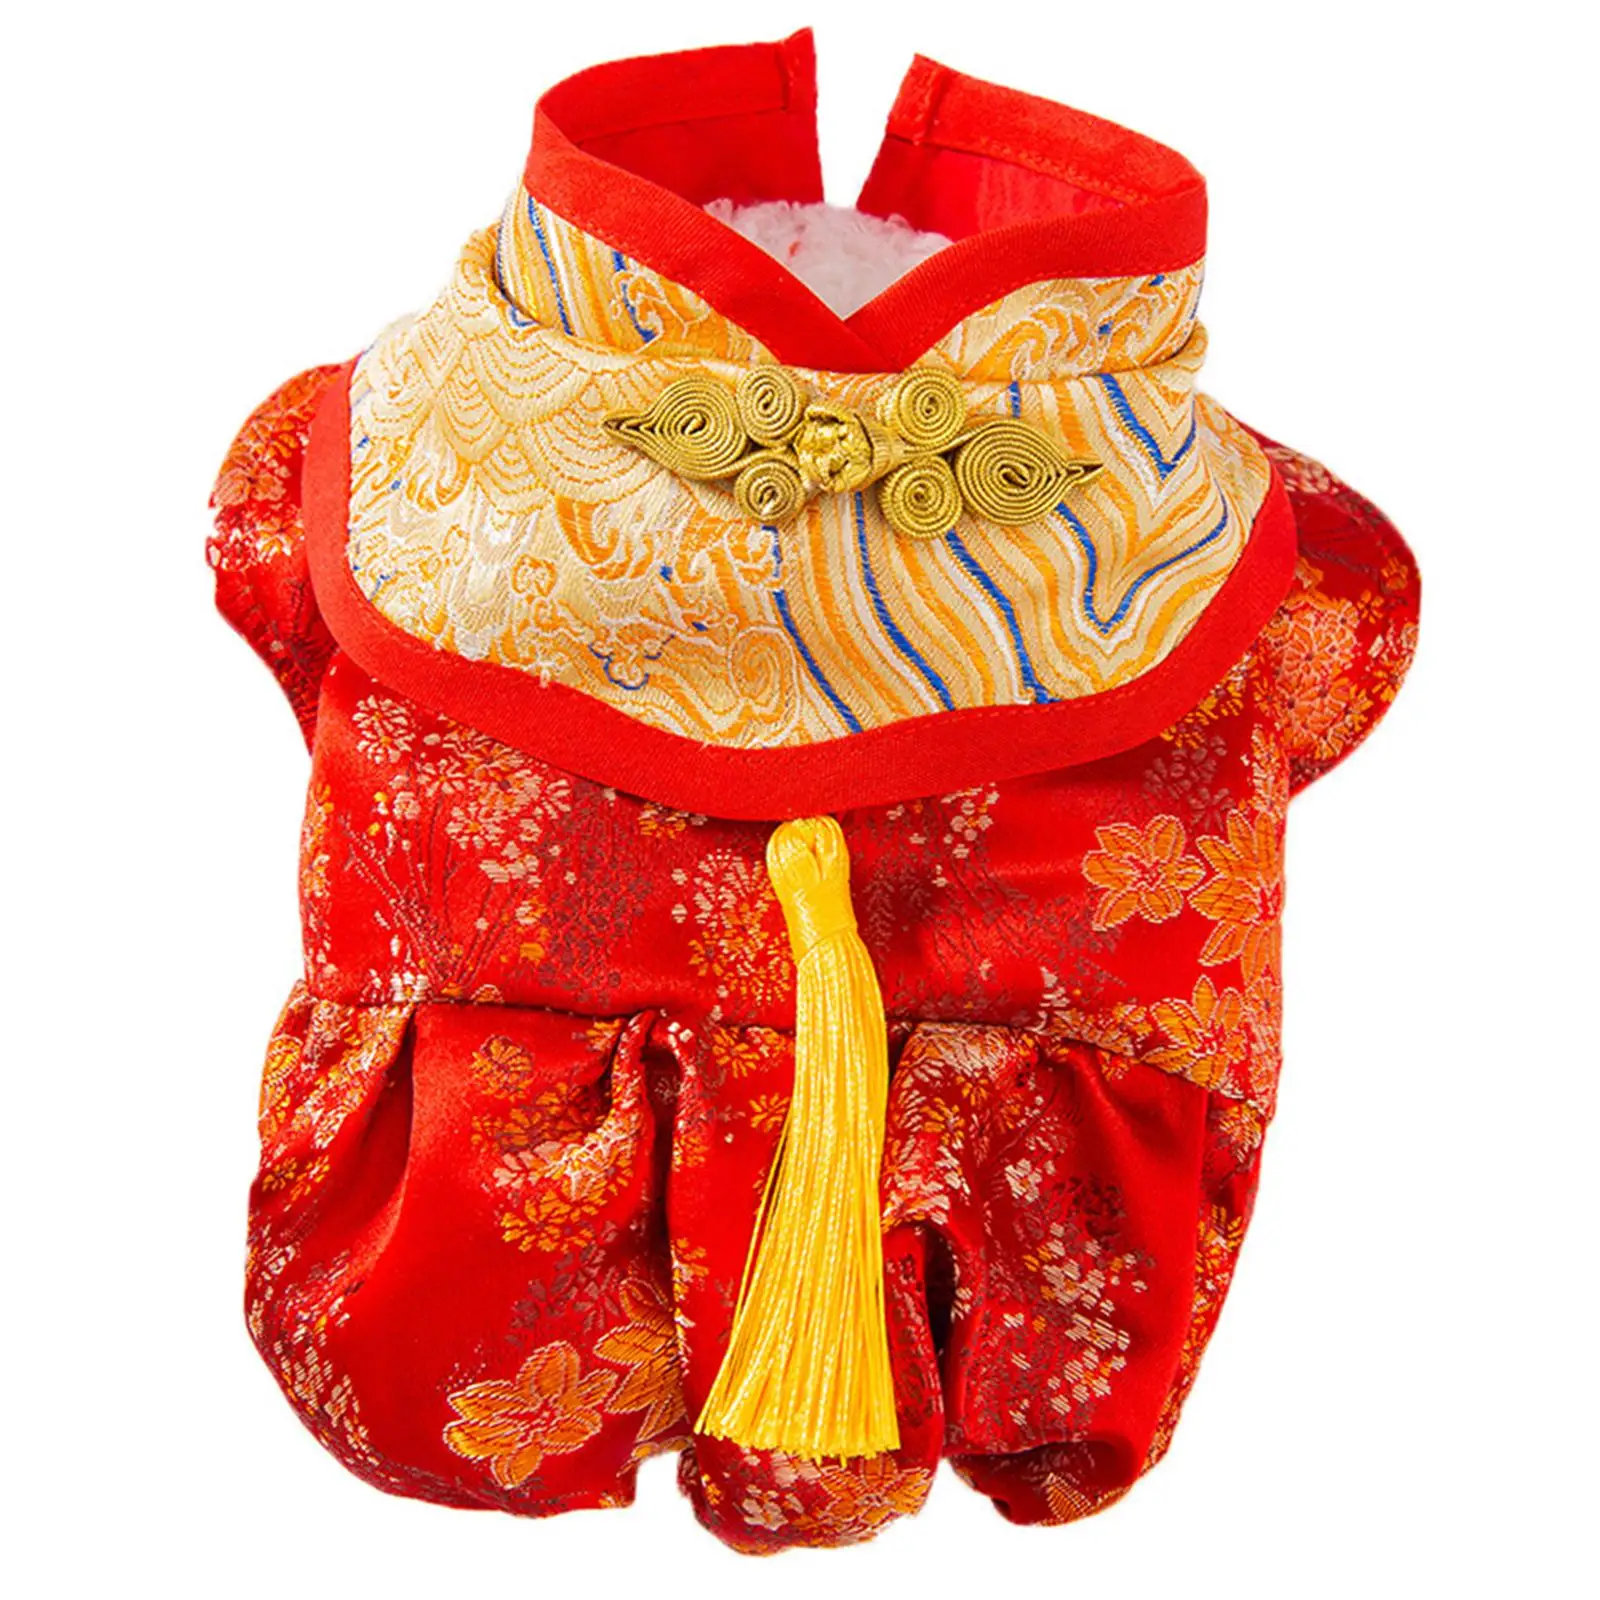 Dog Chinese New Year Costume Cute Tassel Pet Costume for Puppy Dogs Teddy